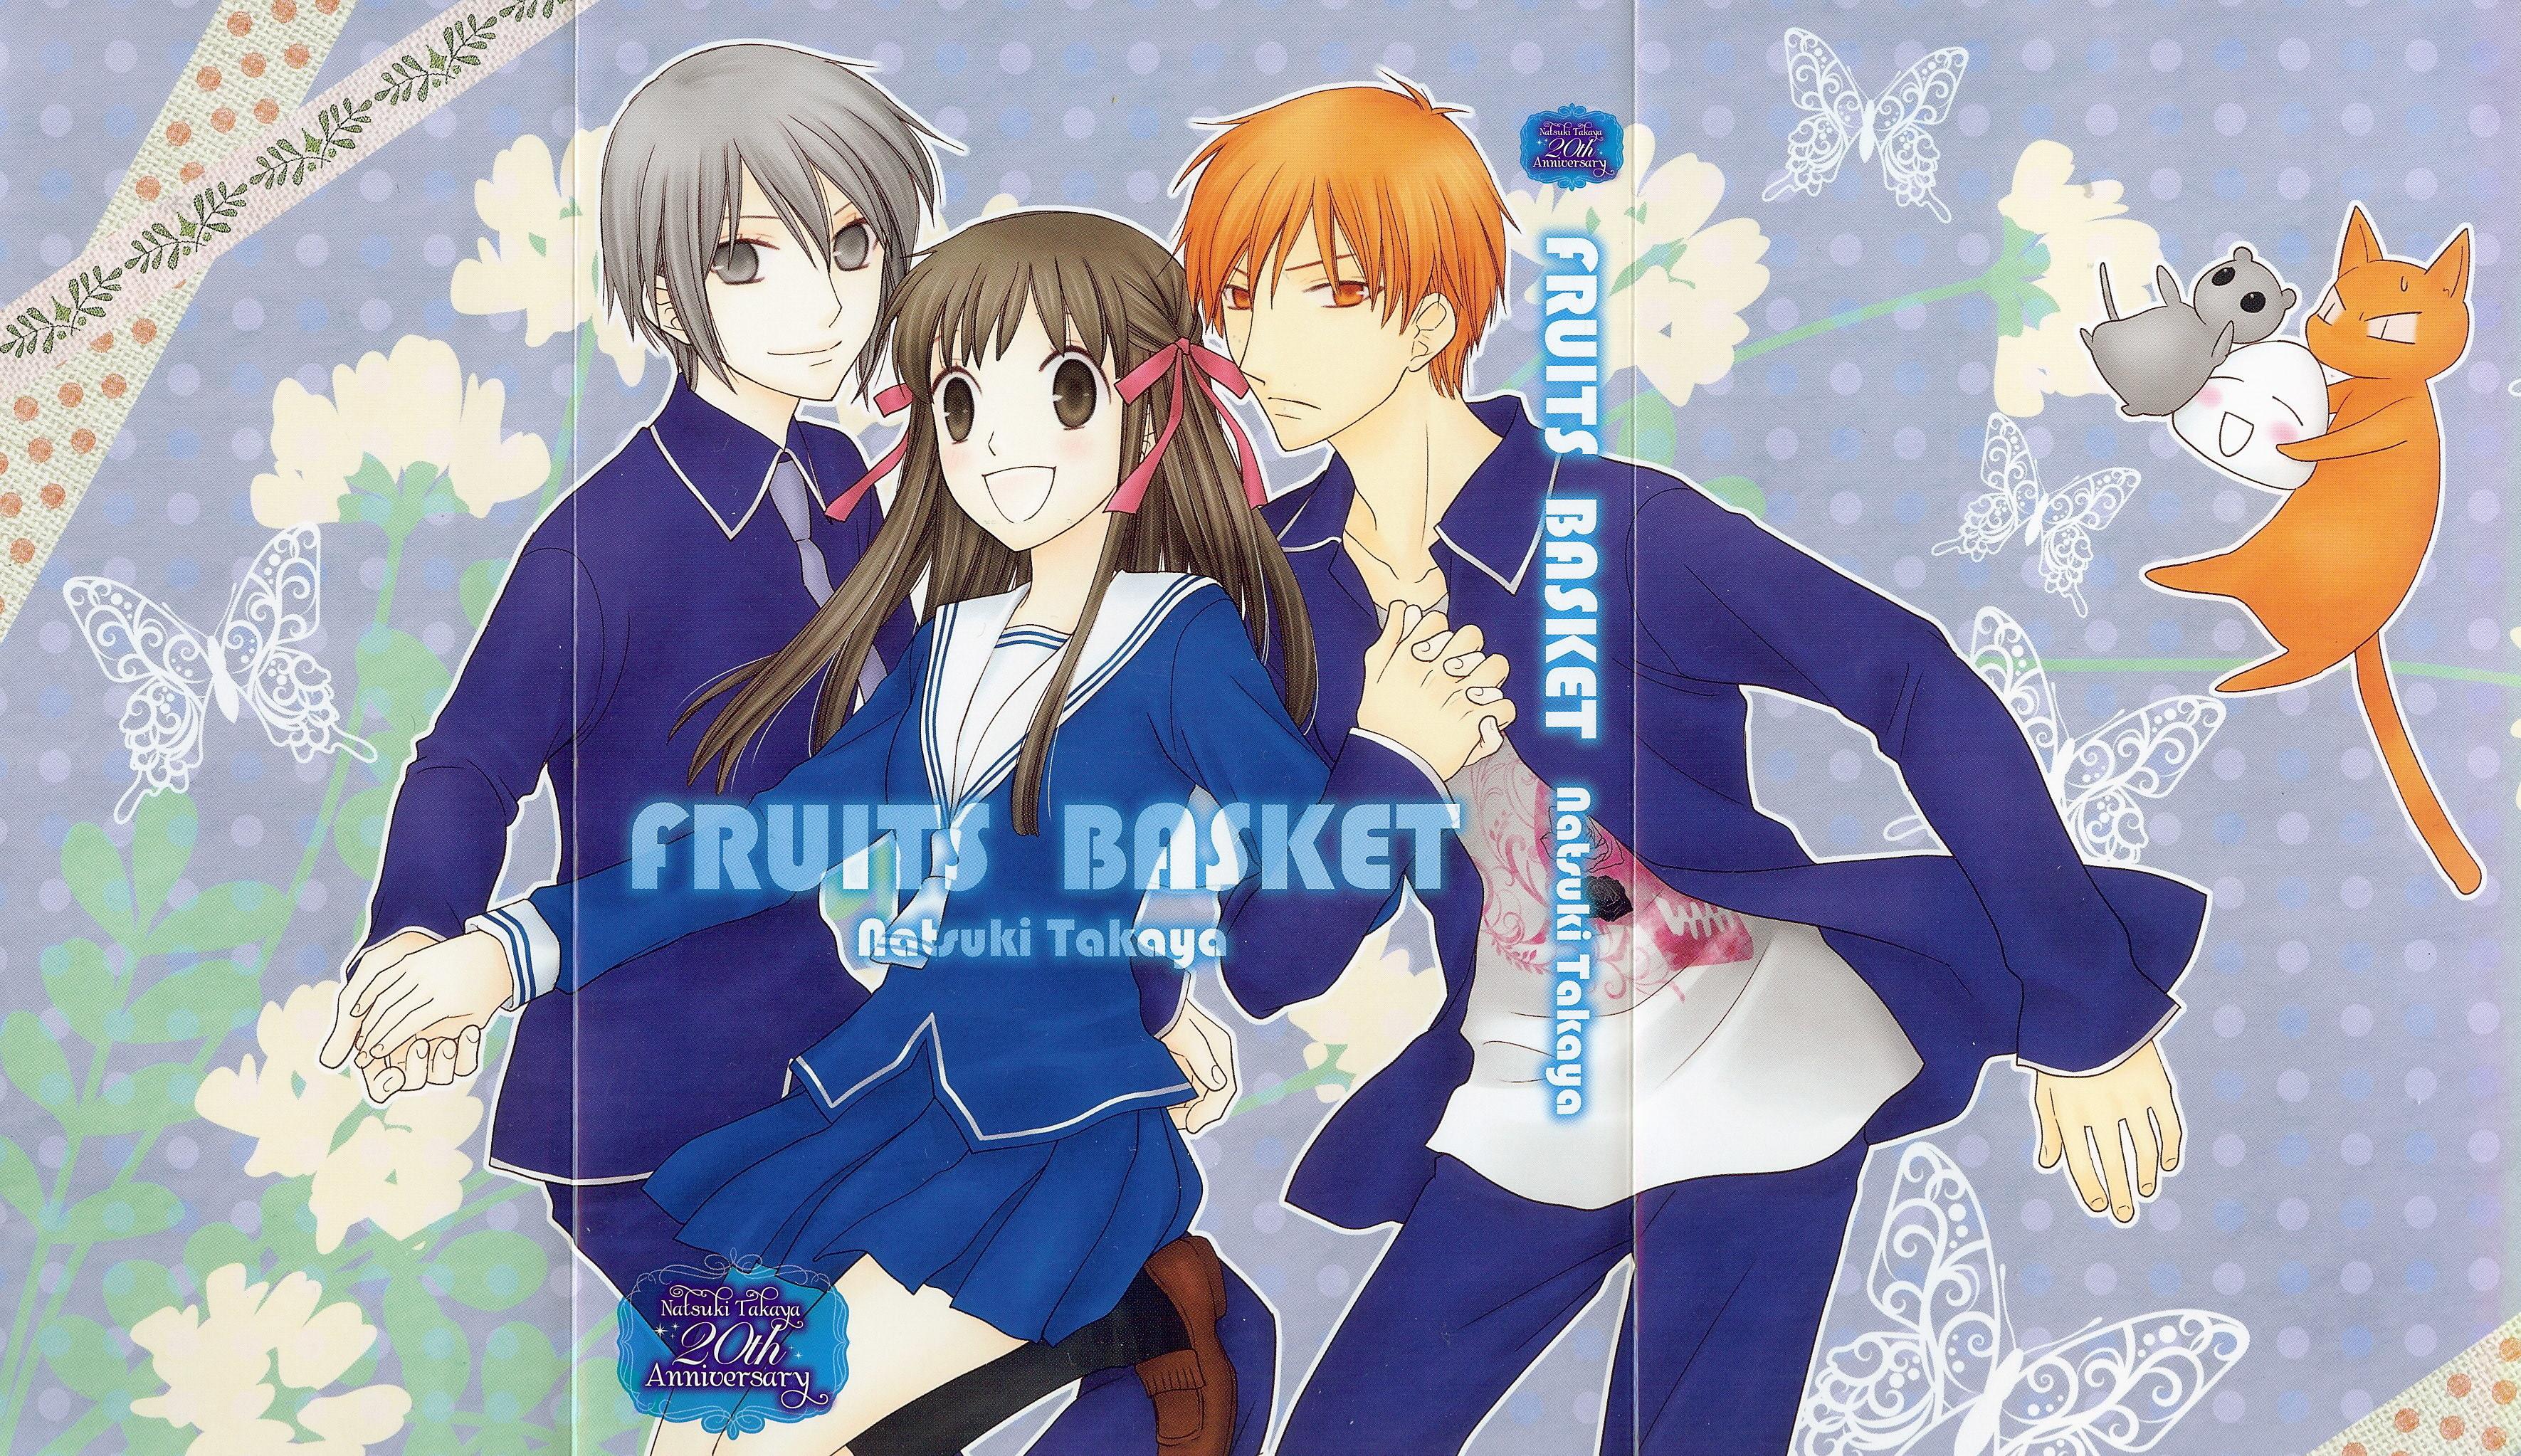 A New PV for 2ndcour of Fruits Basket Anime has been released